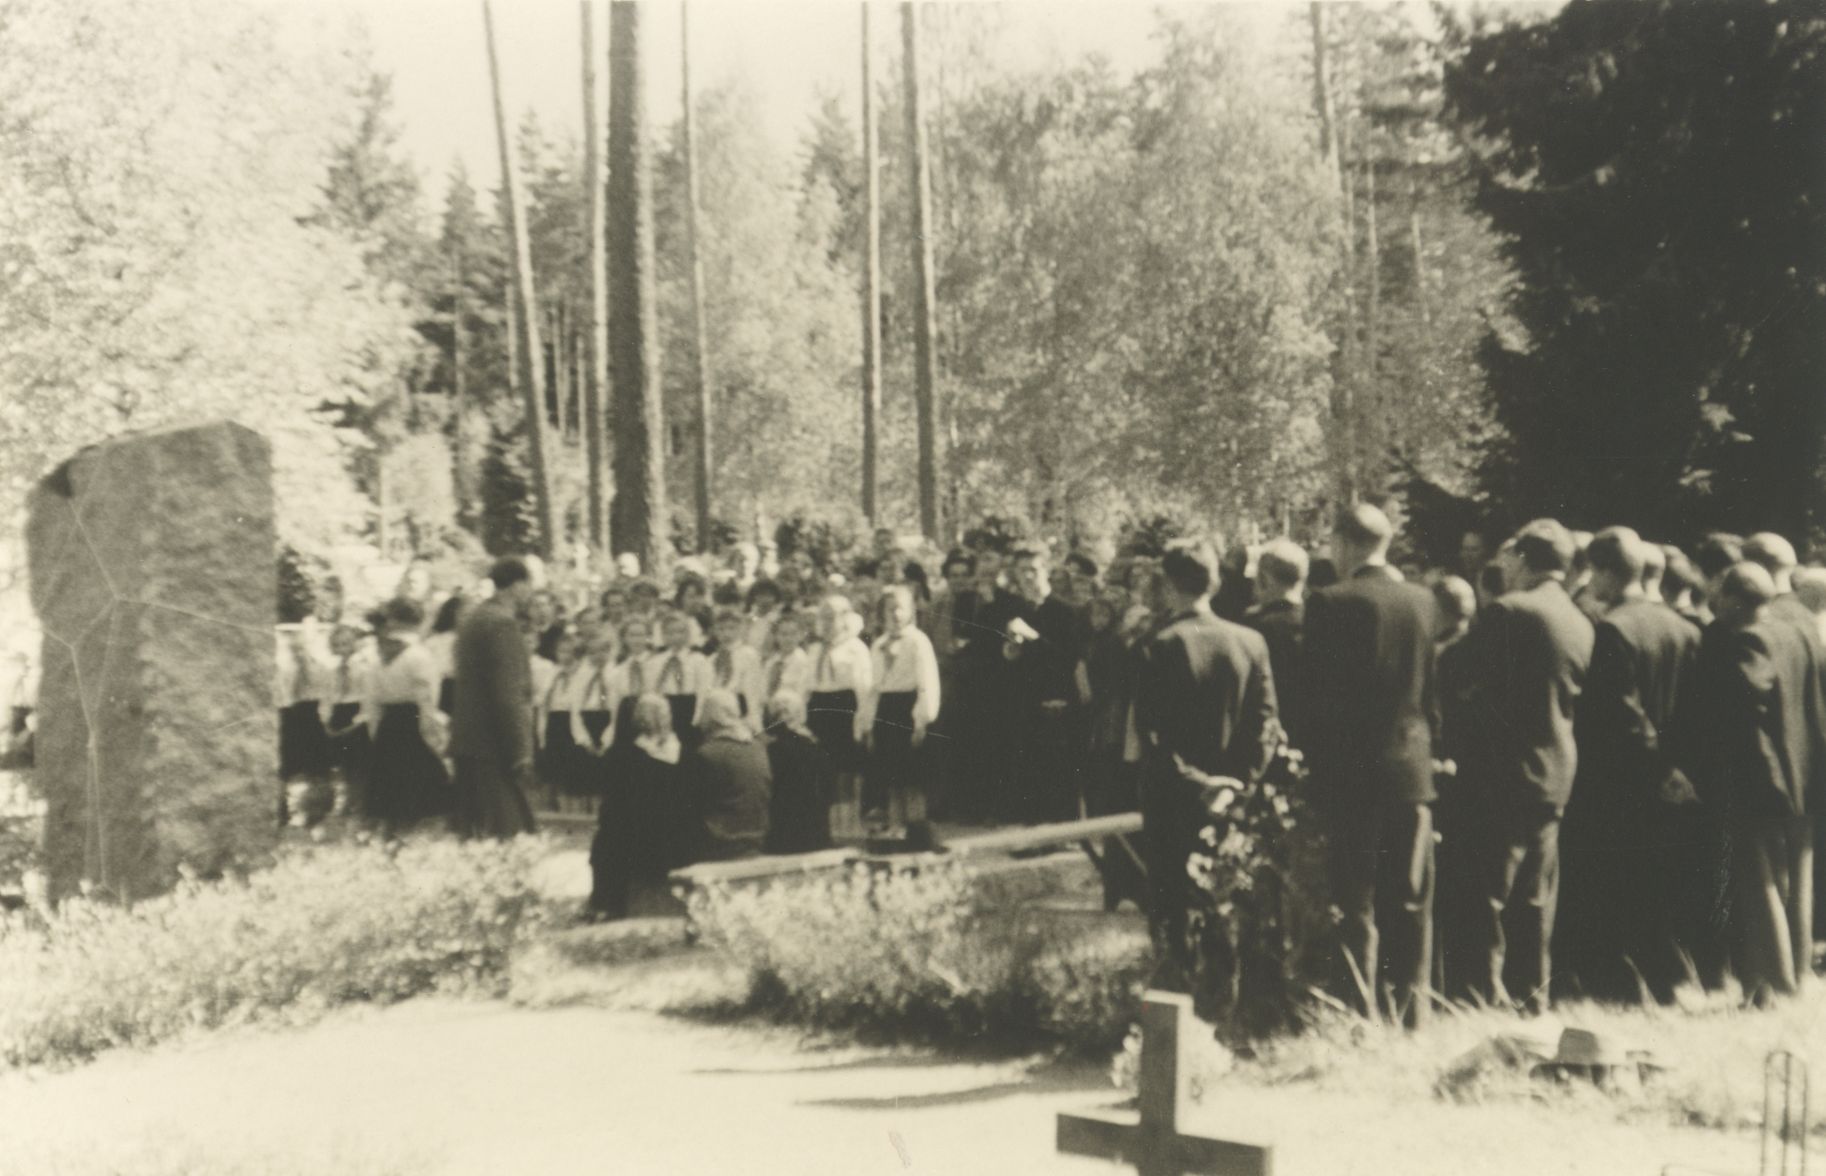 Opening of the tomb of Jaan Kärner on Elva cemetery 27. V 1961. General view